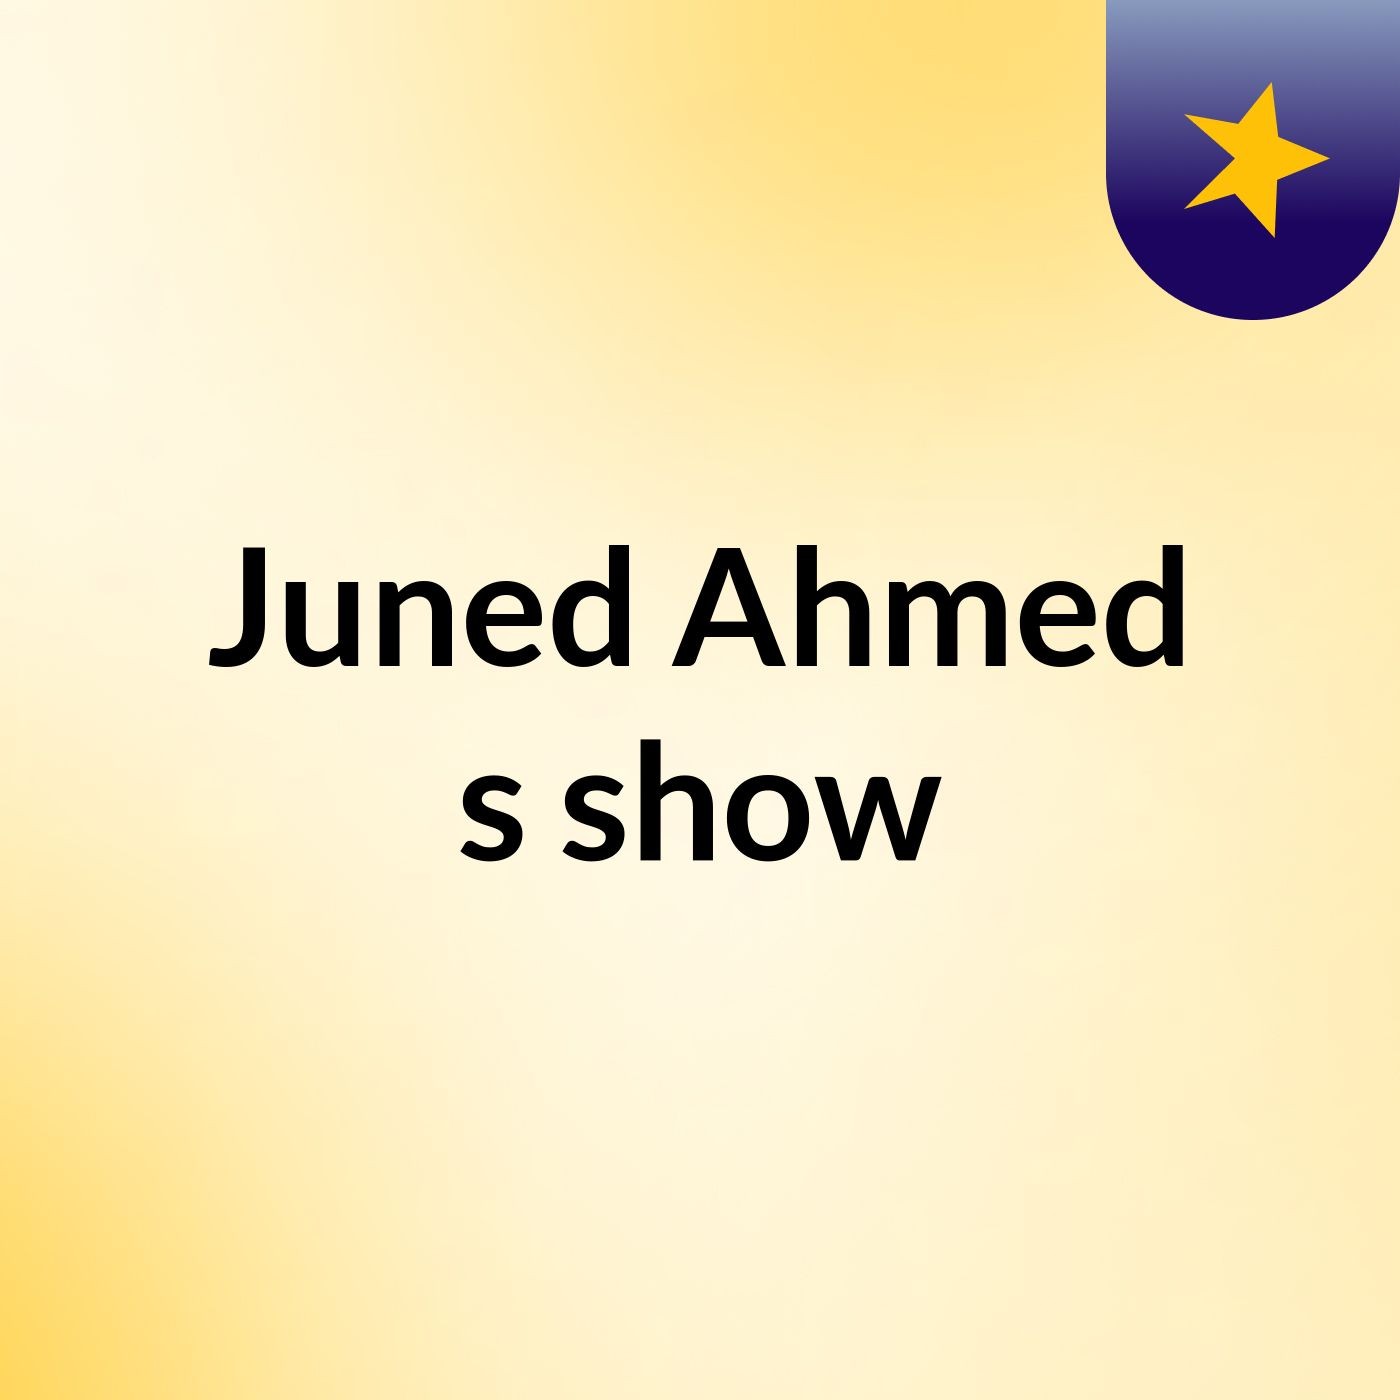 Juned Ahmed's show